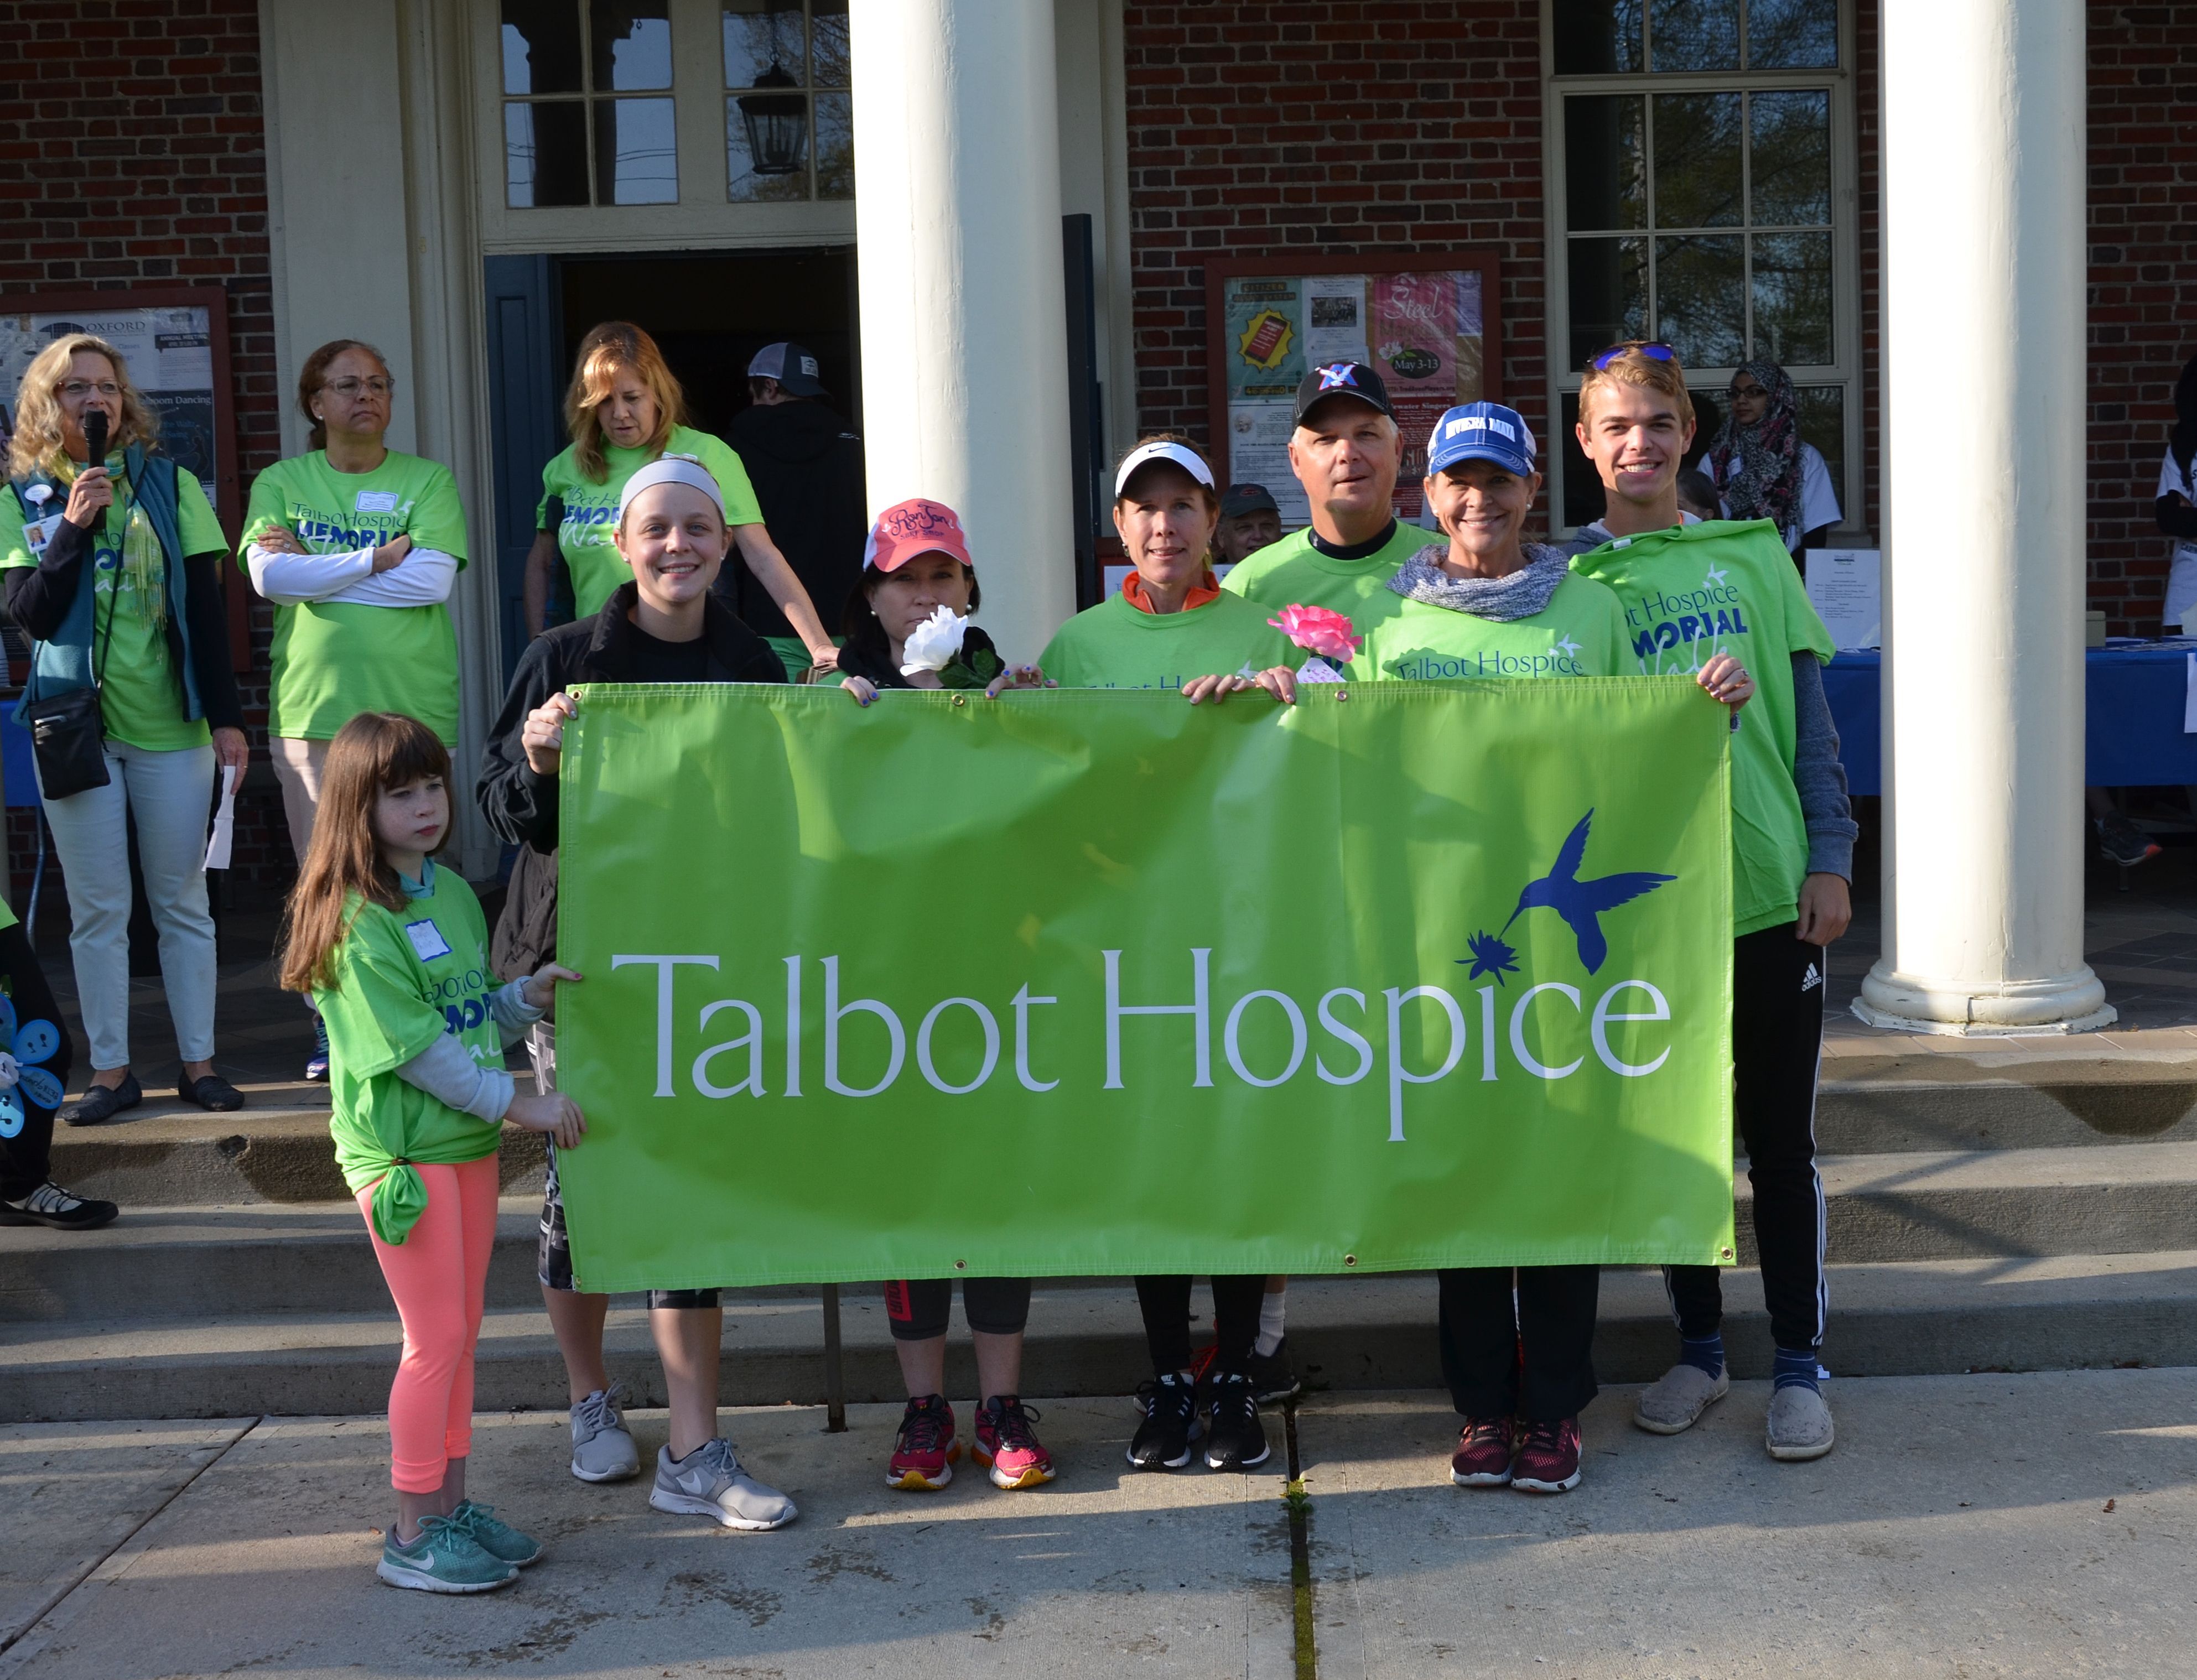 The Talbot Hospice Memorial Walk will return to Oxford this Spring as part of the annual Oxford Day tradition on Saturday, April 22nd, at 1:00 pm.